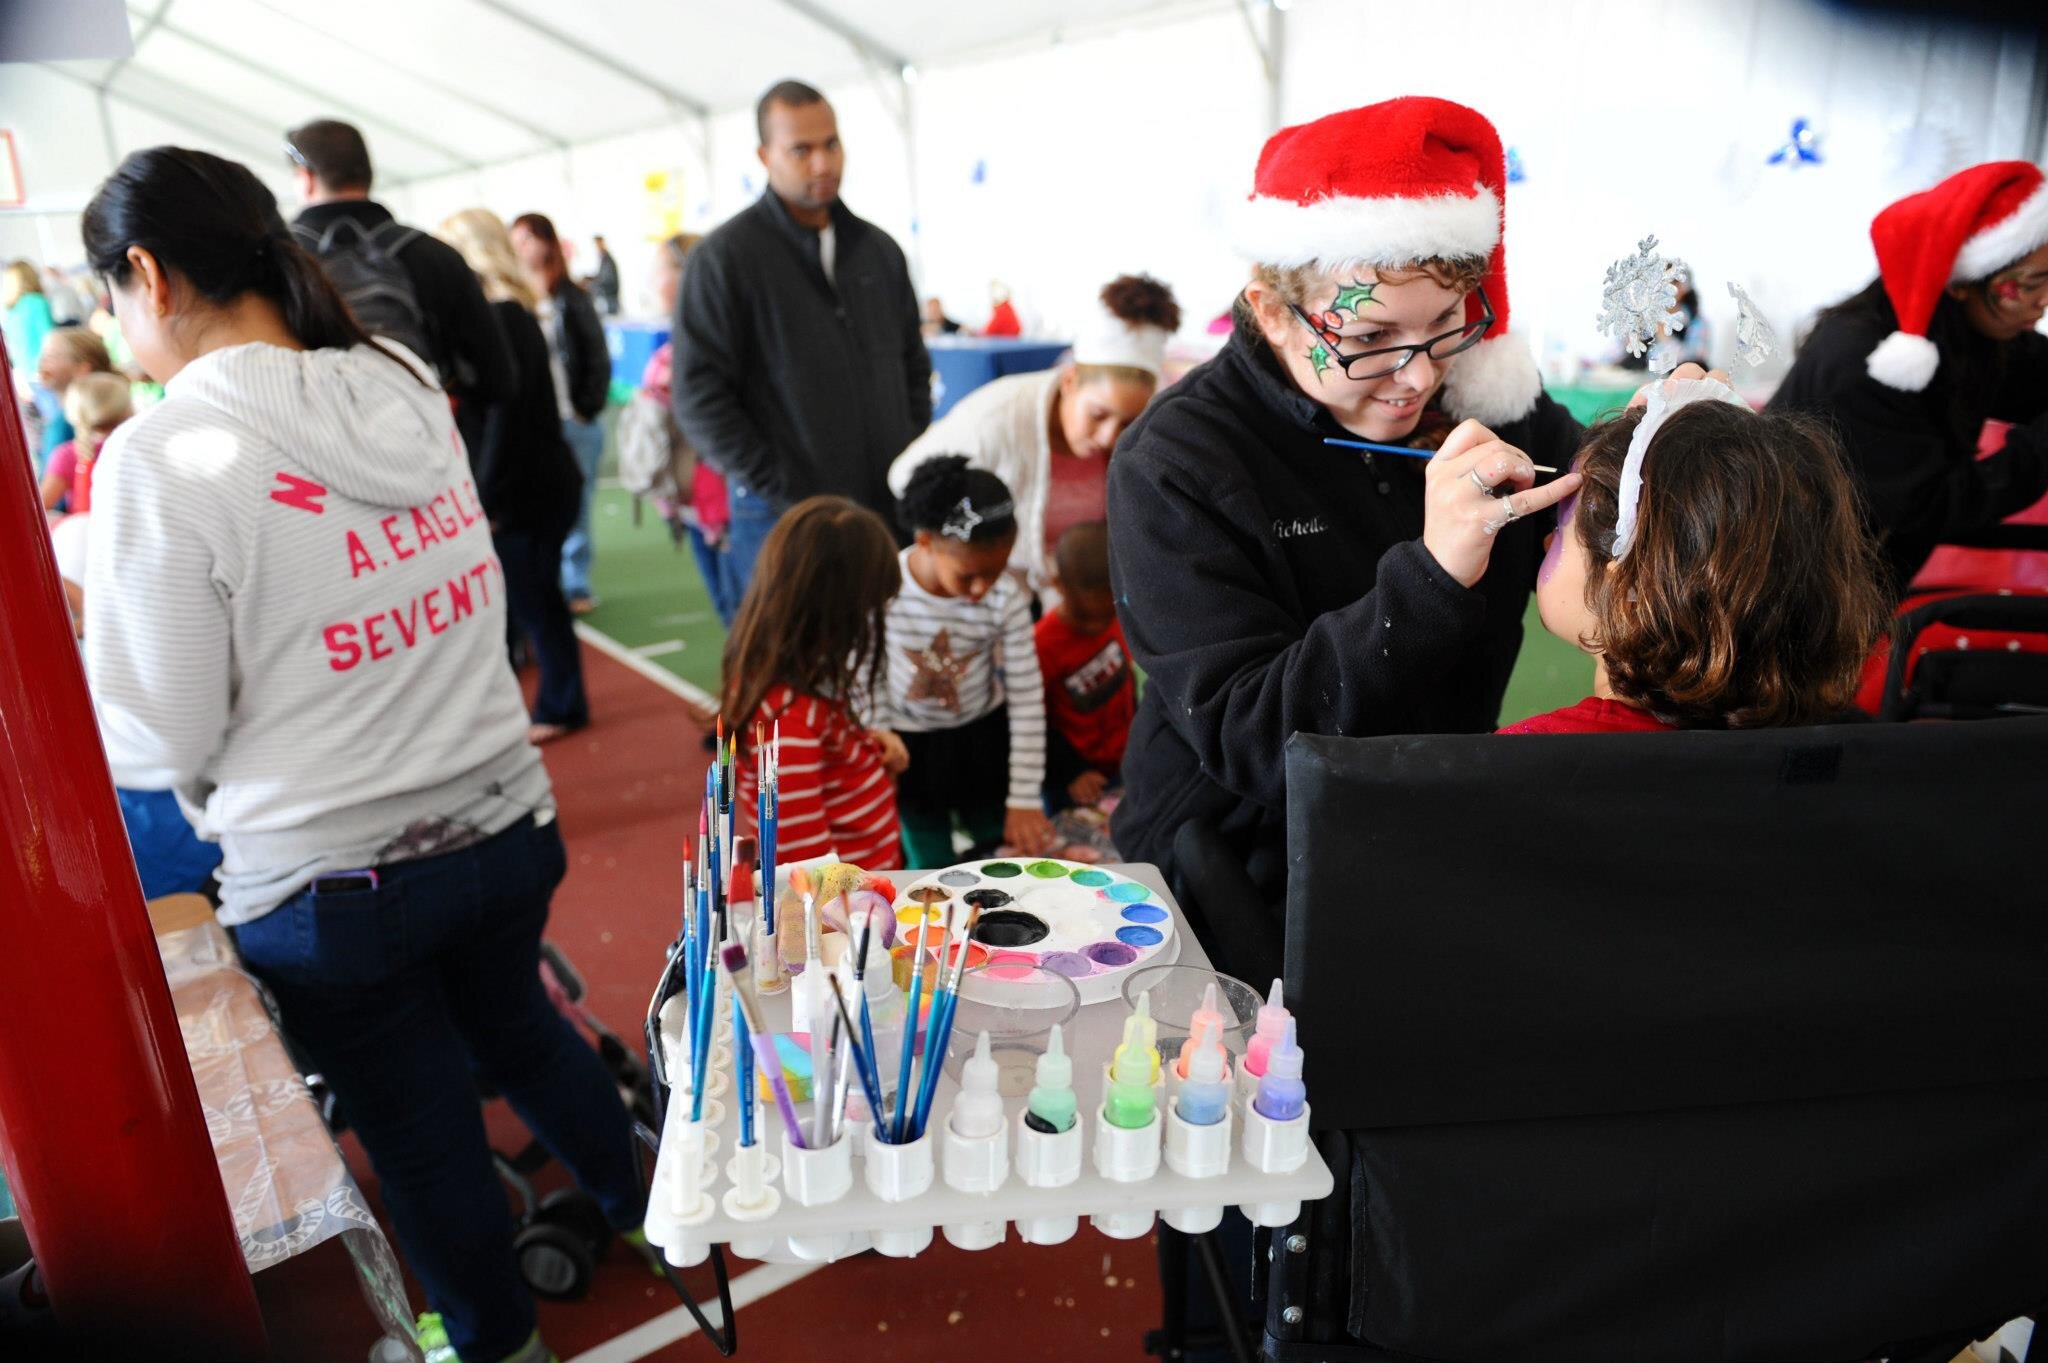 Lots of fun activities at our winter holiday event!